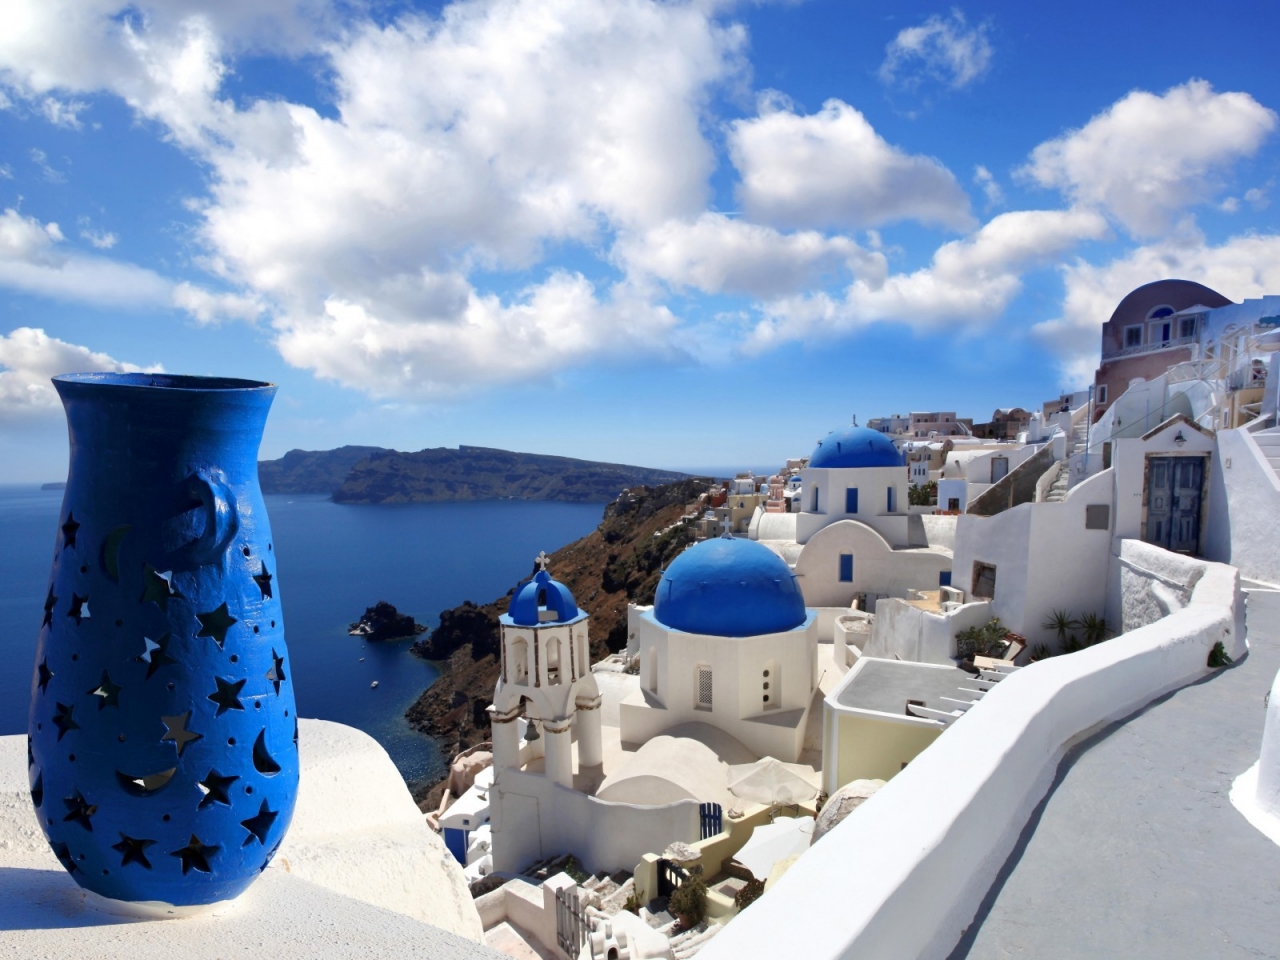 Ideal View from Santorini for 1280 x 960 resolution